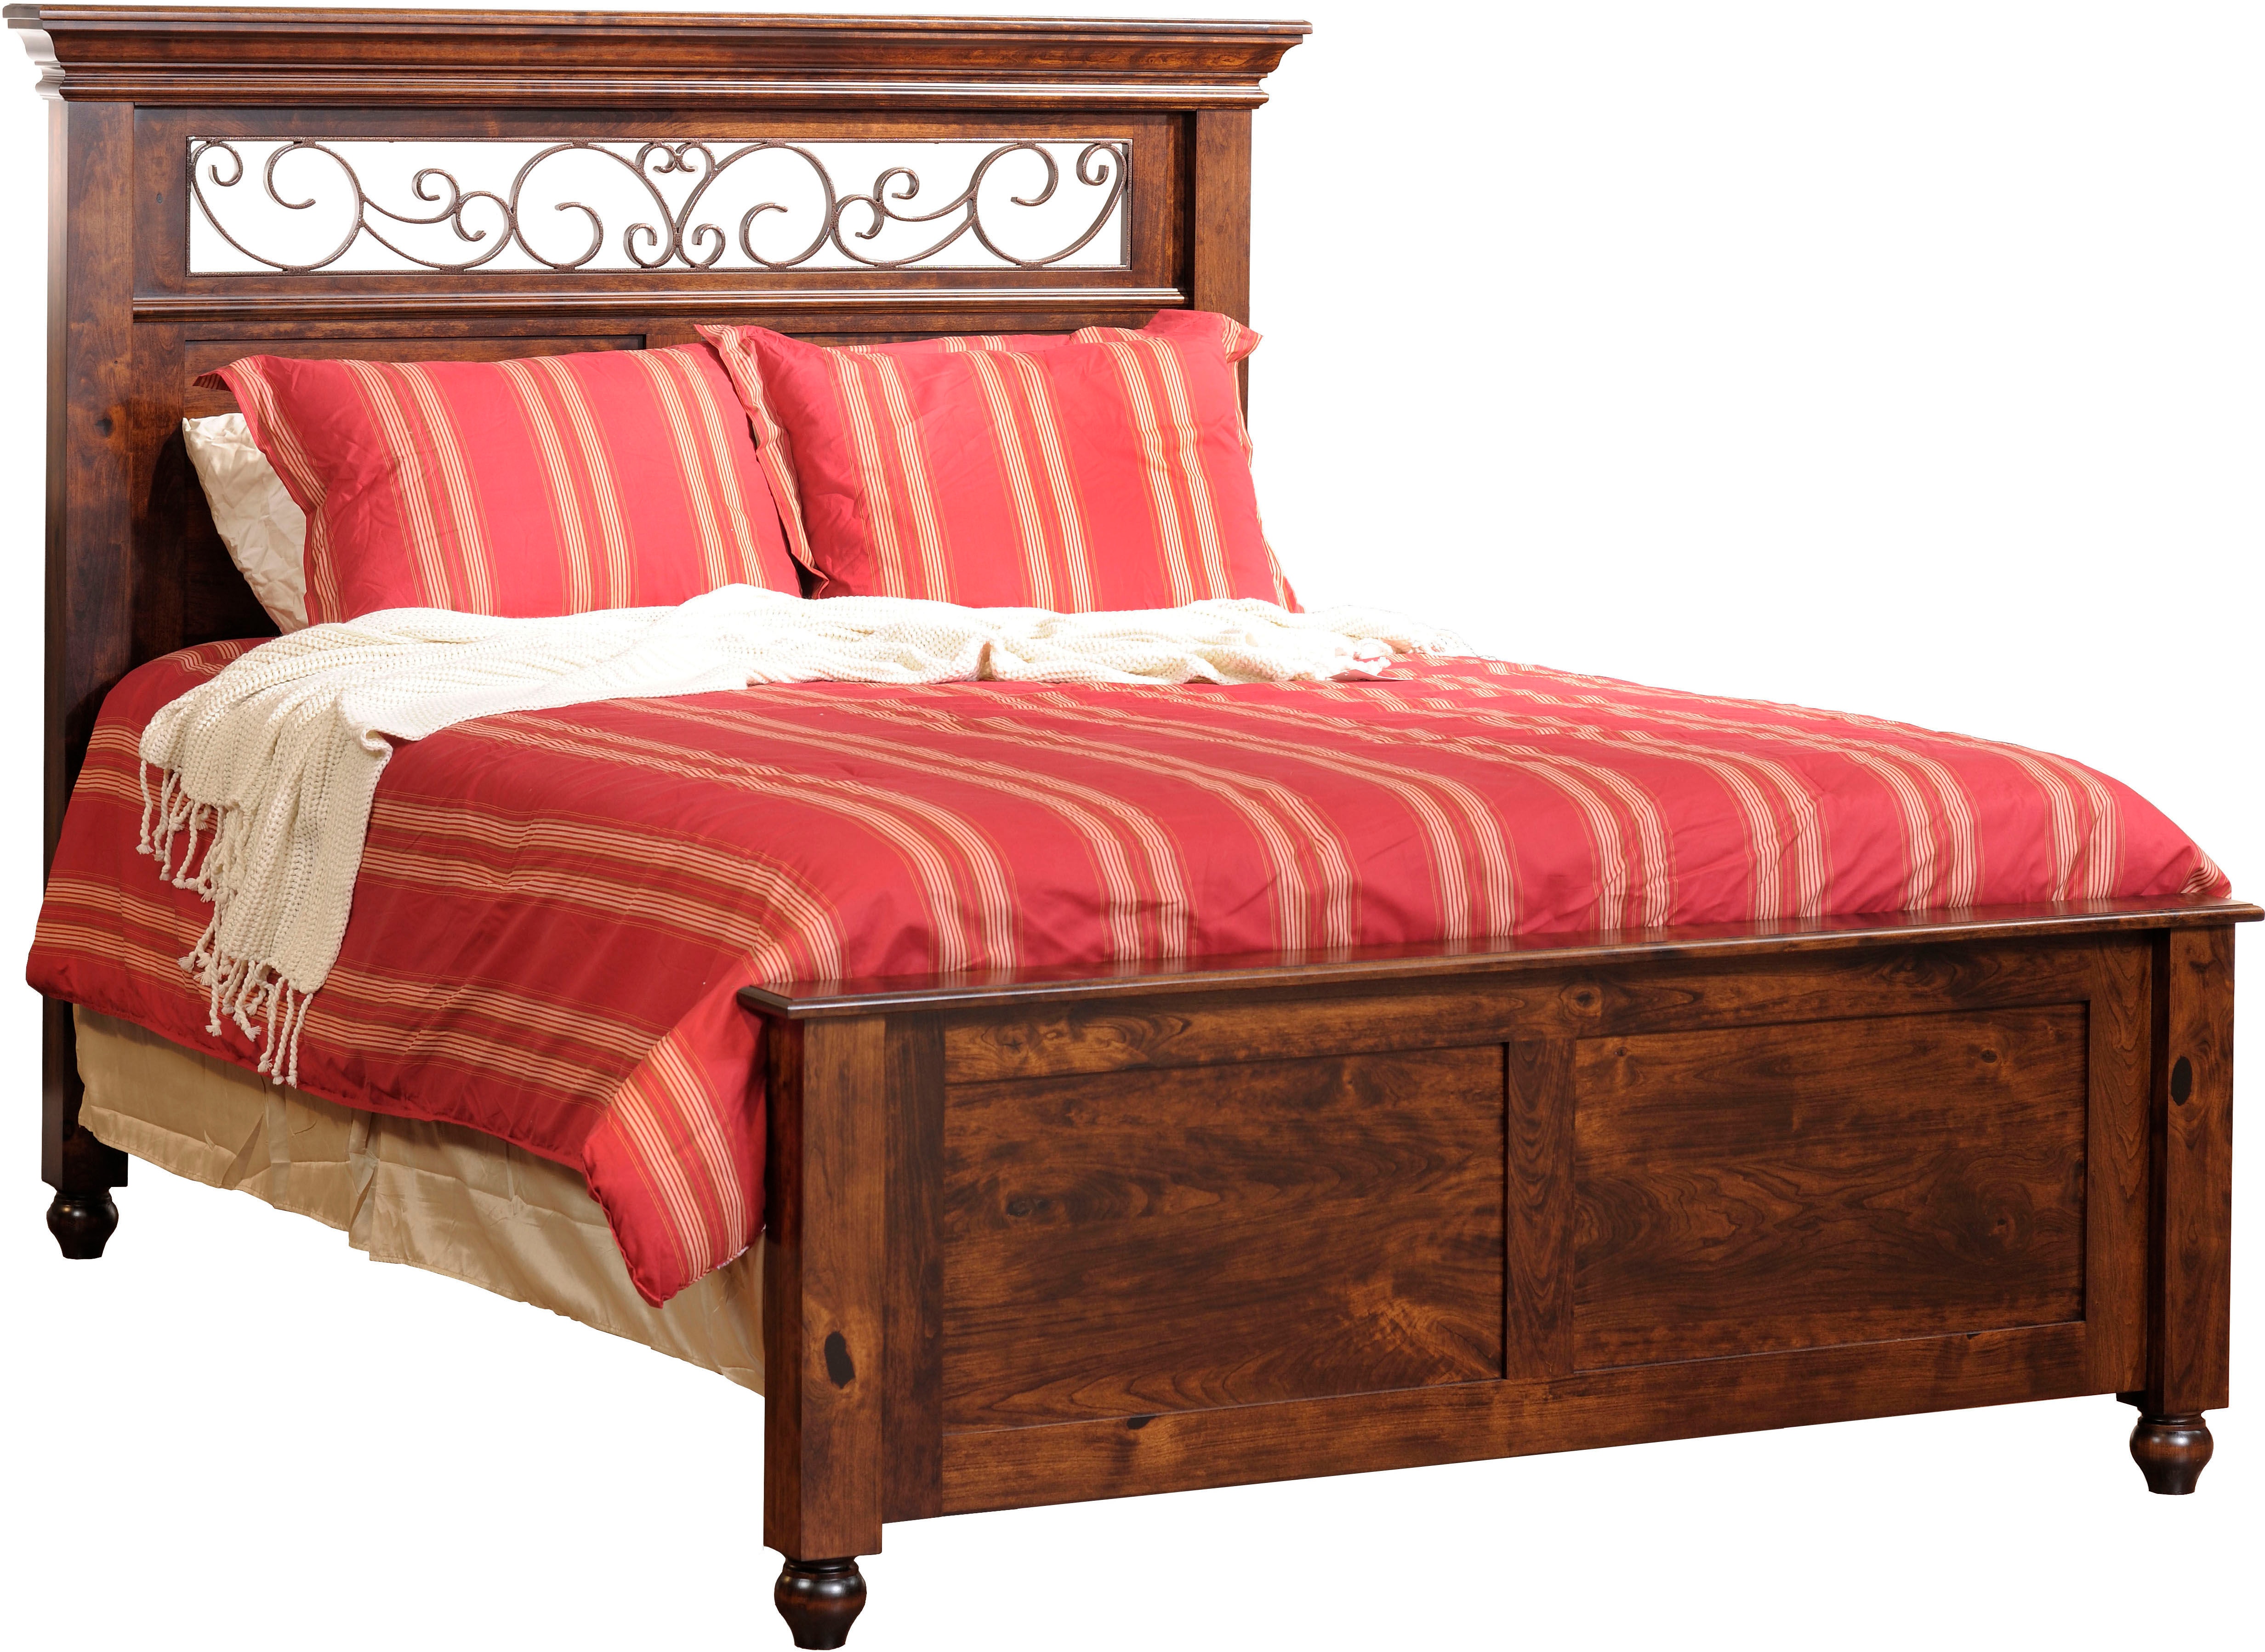 Jamestown Wrought Iron Bed Vvo3x4166